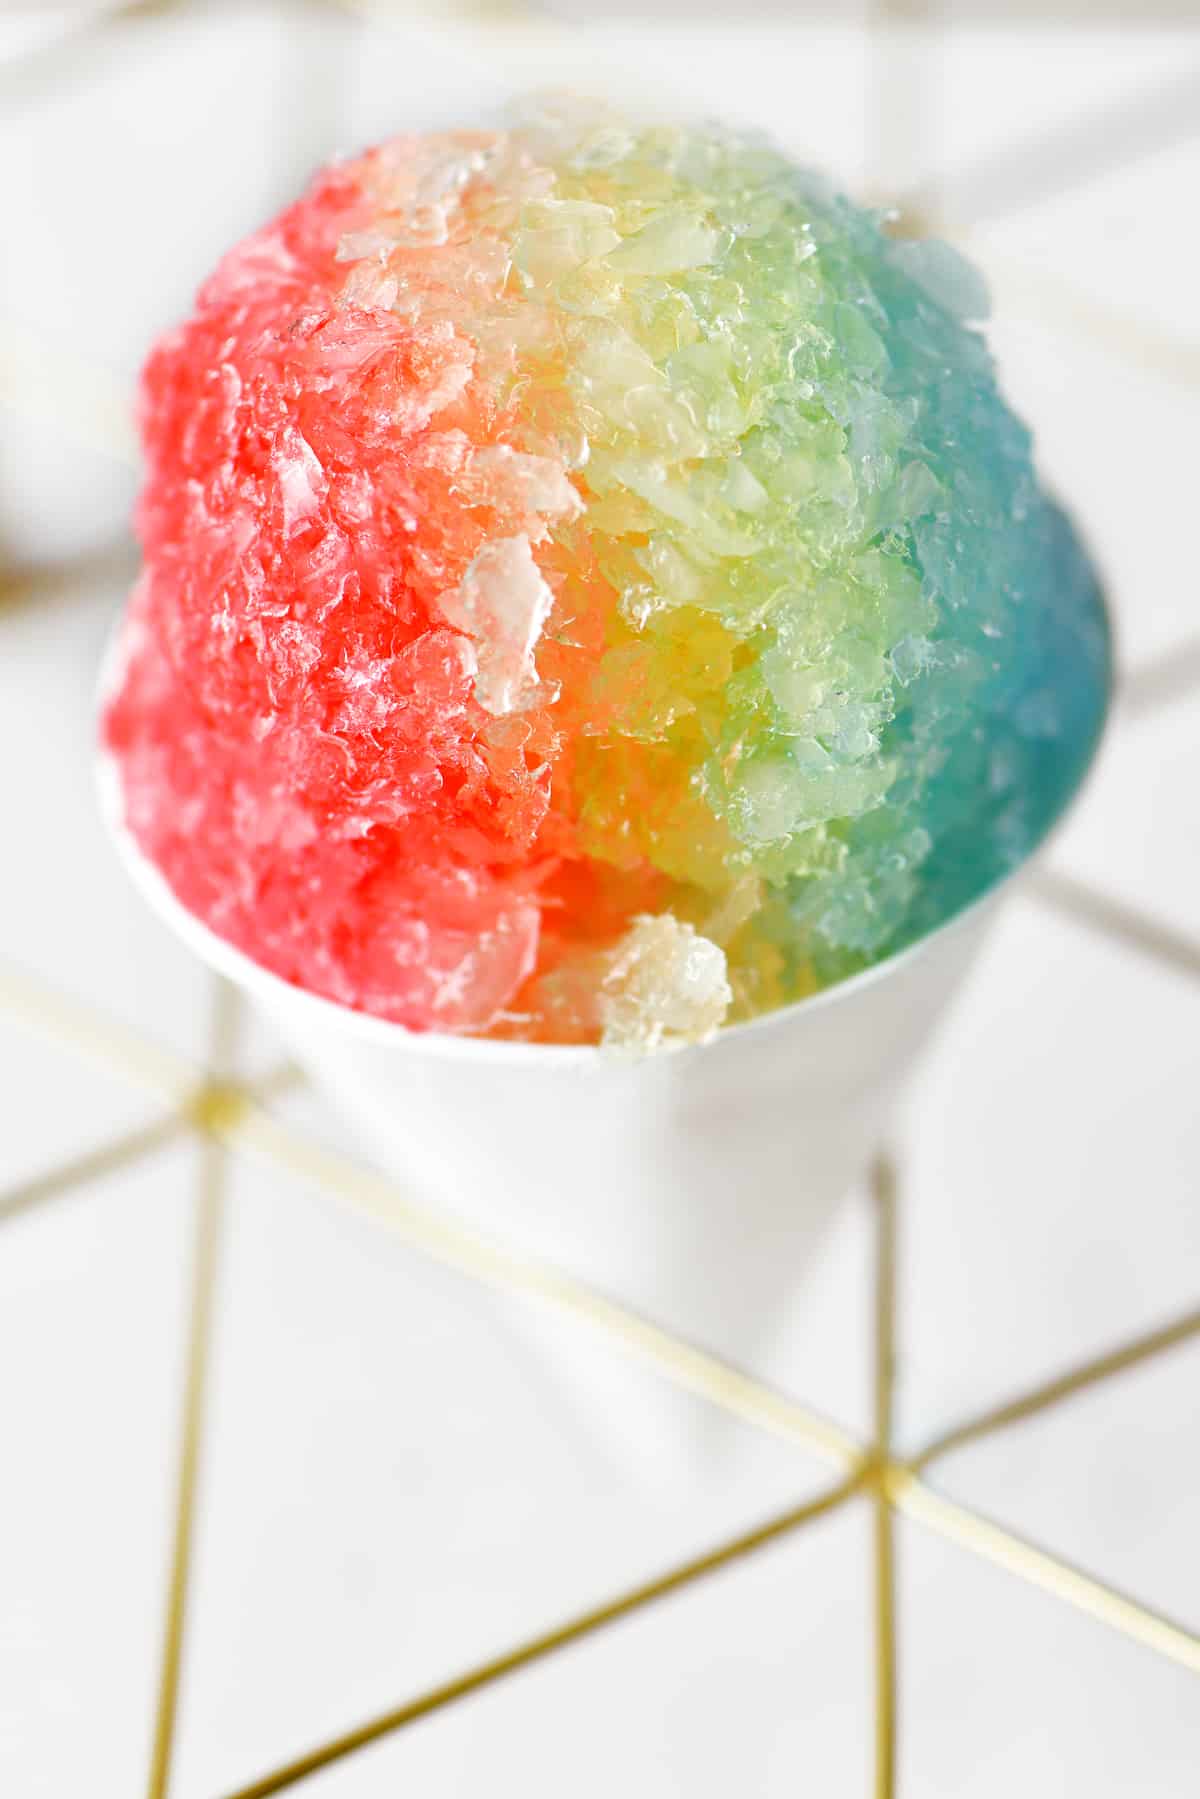 a red, yellow and blue snow cone